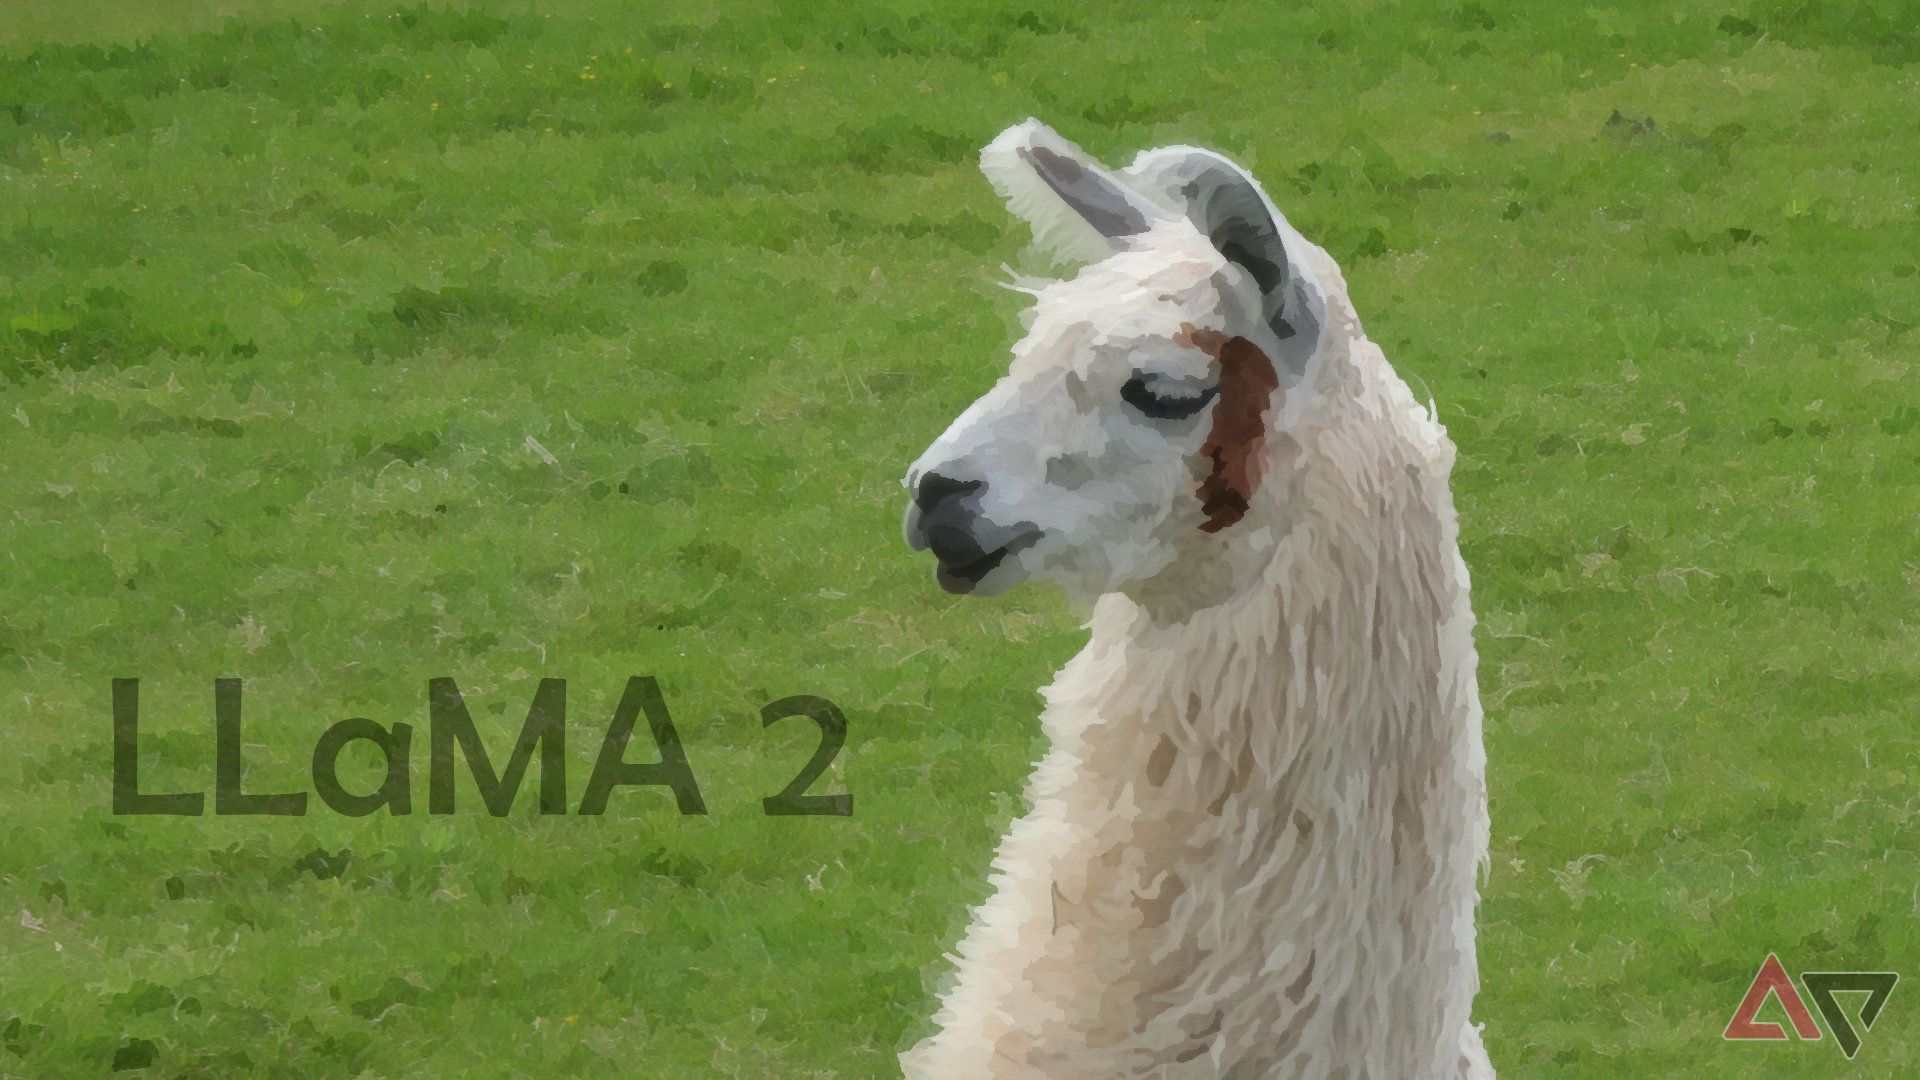 The name LLaMA 2 appears over a stylized photo of a real llama.